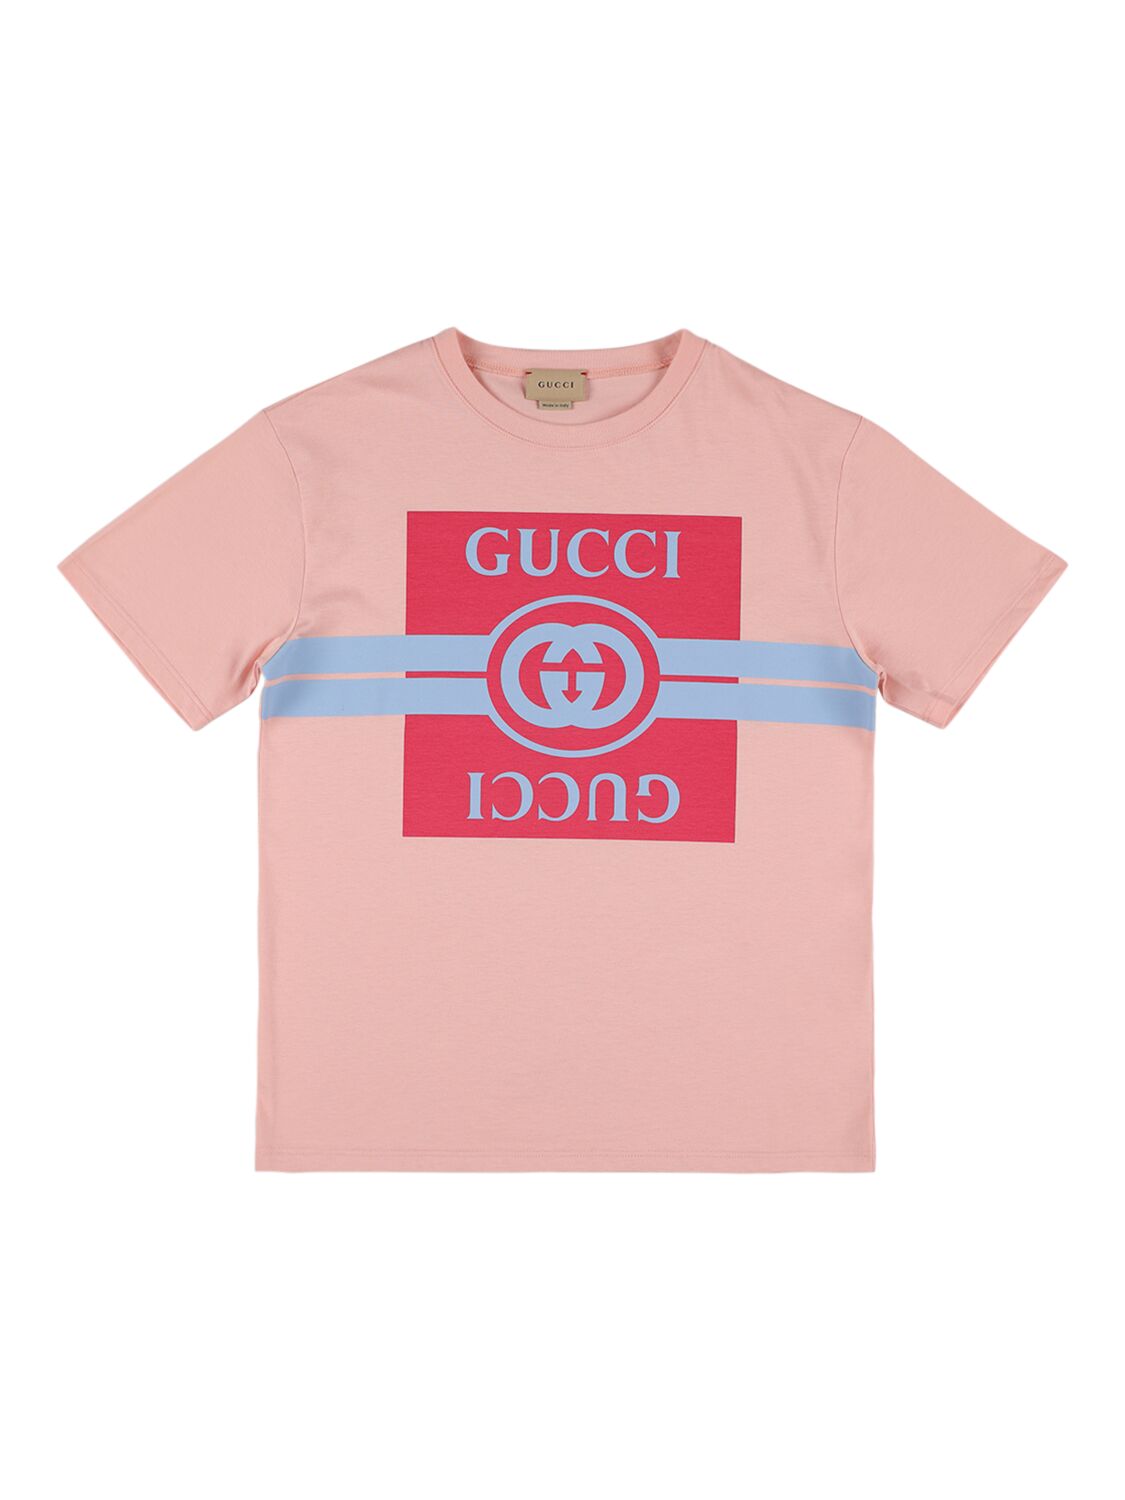 Gucci Kids' Cotton Jersey T-shirt In Pink